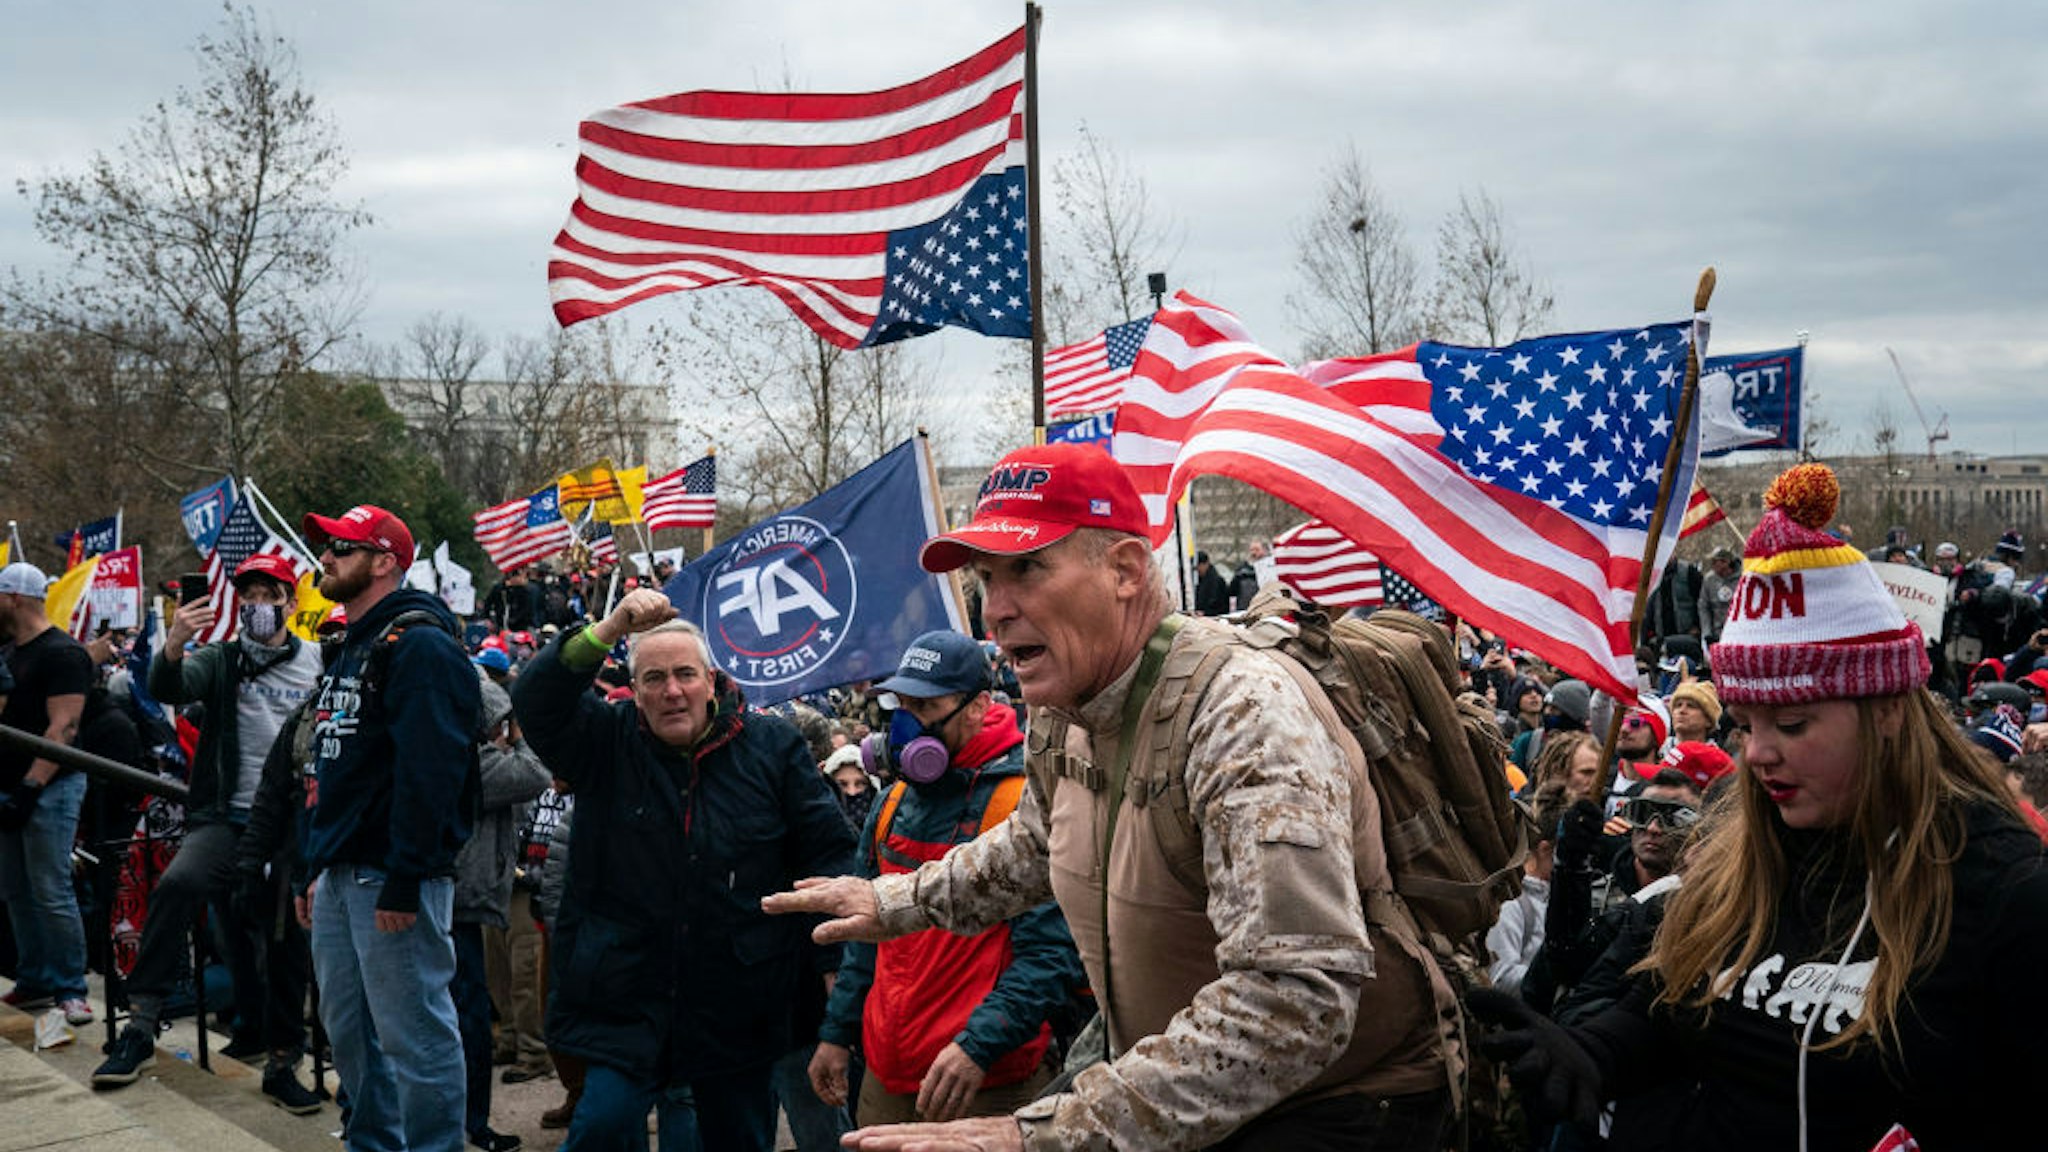 WASHINGTON, DC - JANUARY 06: Ray Epps, in the red Trump hat, center, gestures to a line of law enforcement officers, as people gather on the West Front of the U.S. Capitol on Wednesday, Jan. 6, 2021 in Washington, DC. January 6 marks the second day of Pro-Trump events fueled by President Donald Trump's continued claims of election fraud in an to overturn the results before Congress finalizes them in a joint session of the 117th Congress. (Kent Nishimura / Los Angeles Times via Getty Images)